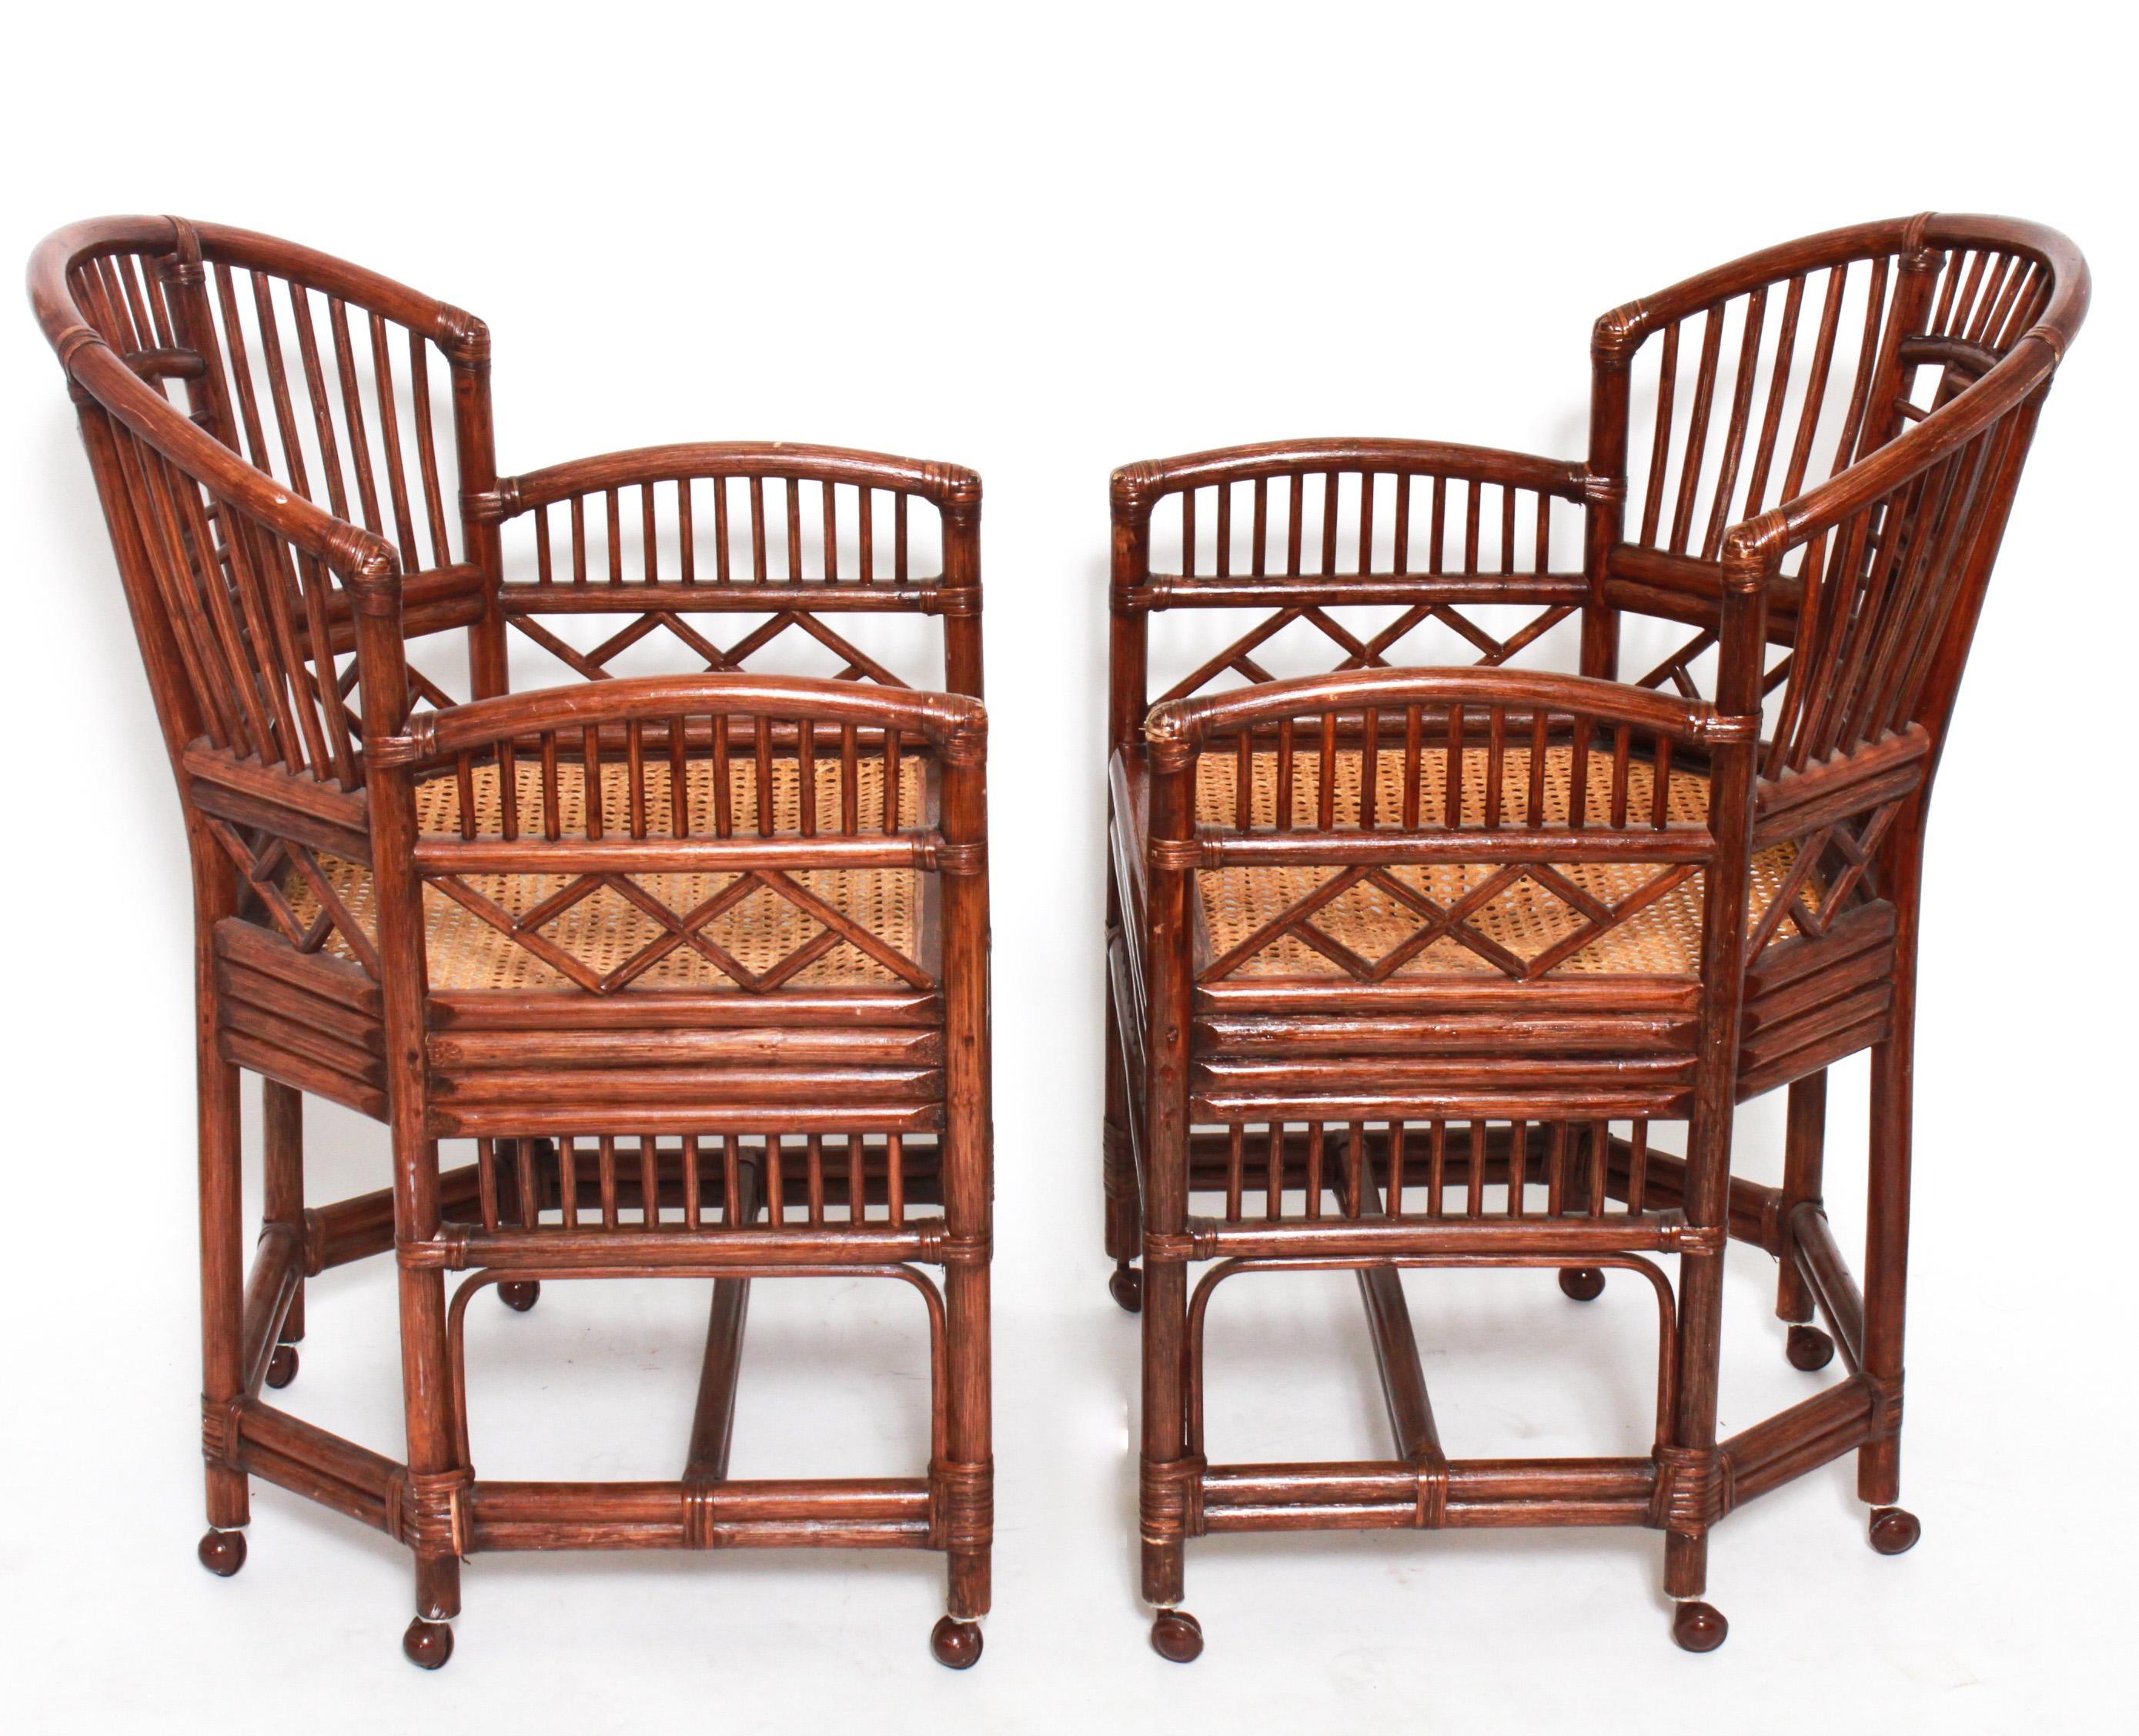 A pair of rattan chinoiserie fretwork armchairs with caned seats and casters to the feet.